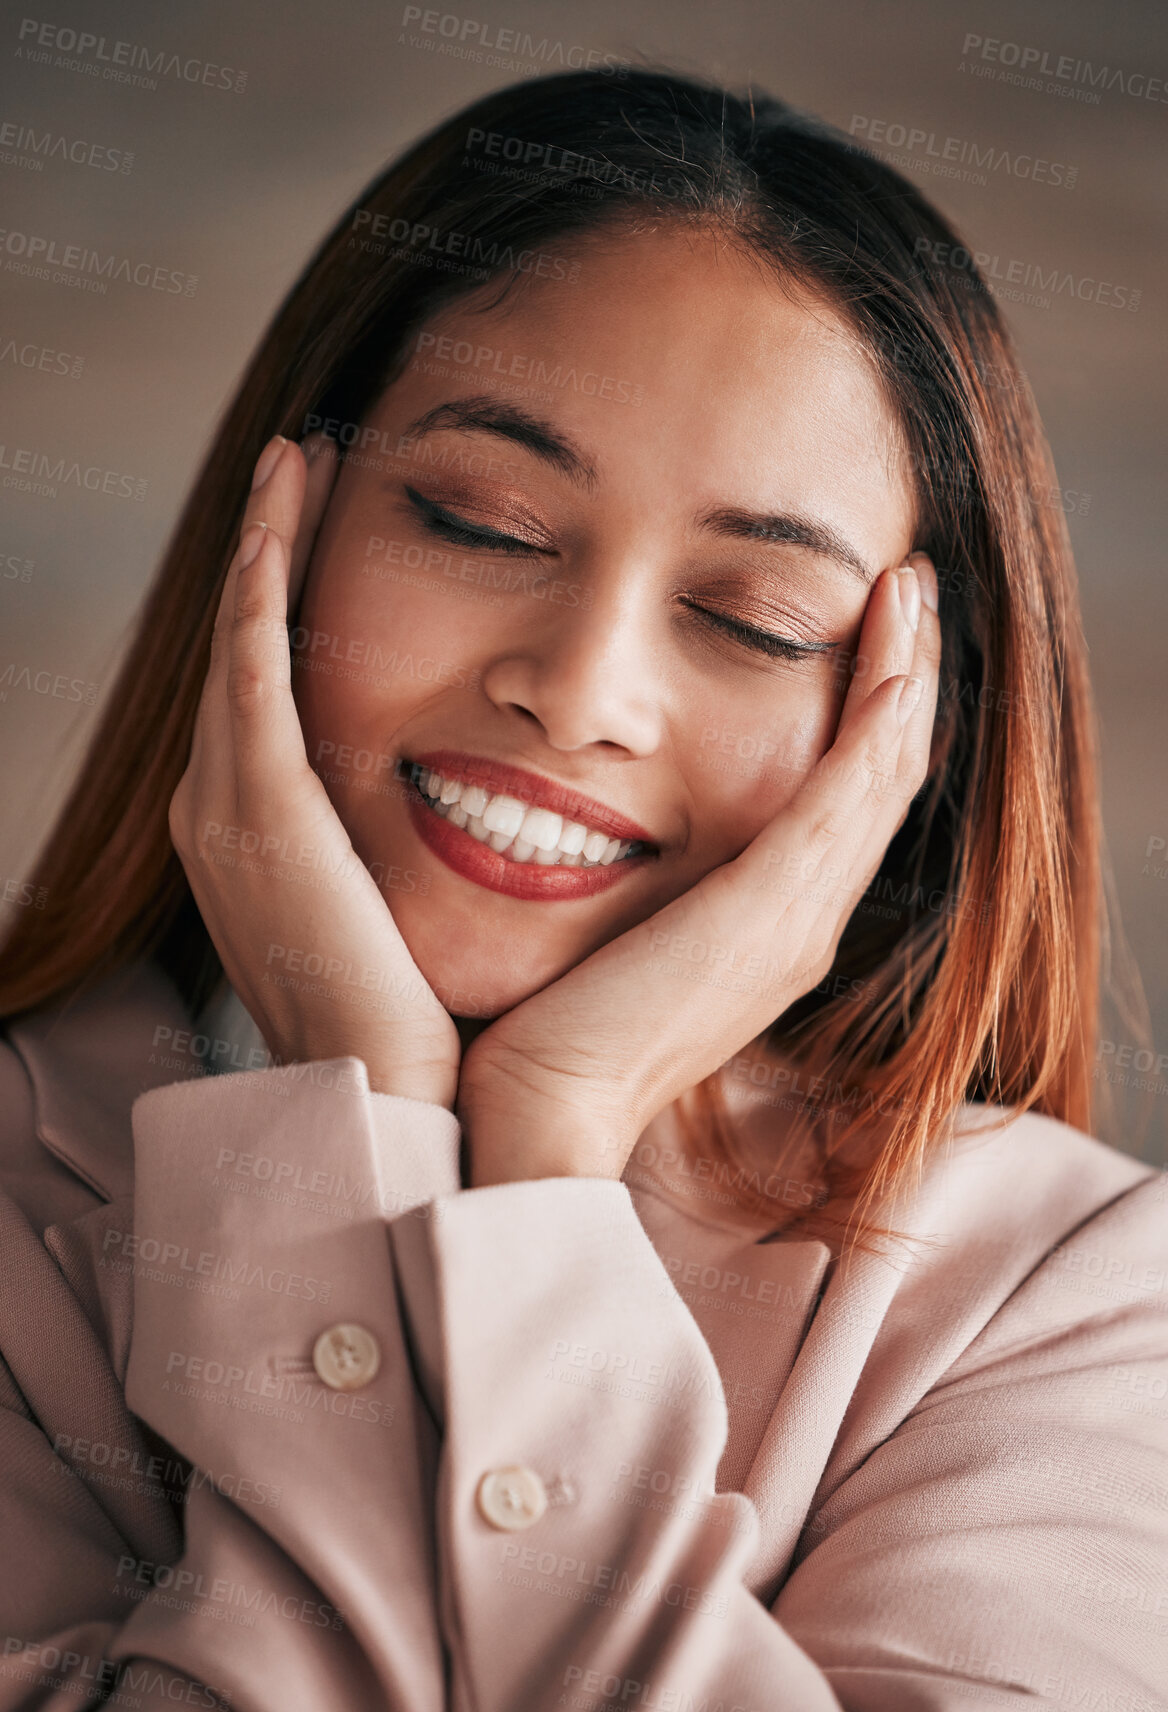 Buy stock photo Happy, content and woman with self love at work isolated on a studio background. Success, smile and face of a corporate employee excited about business, professional career and happiness in office